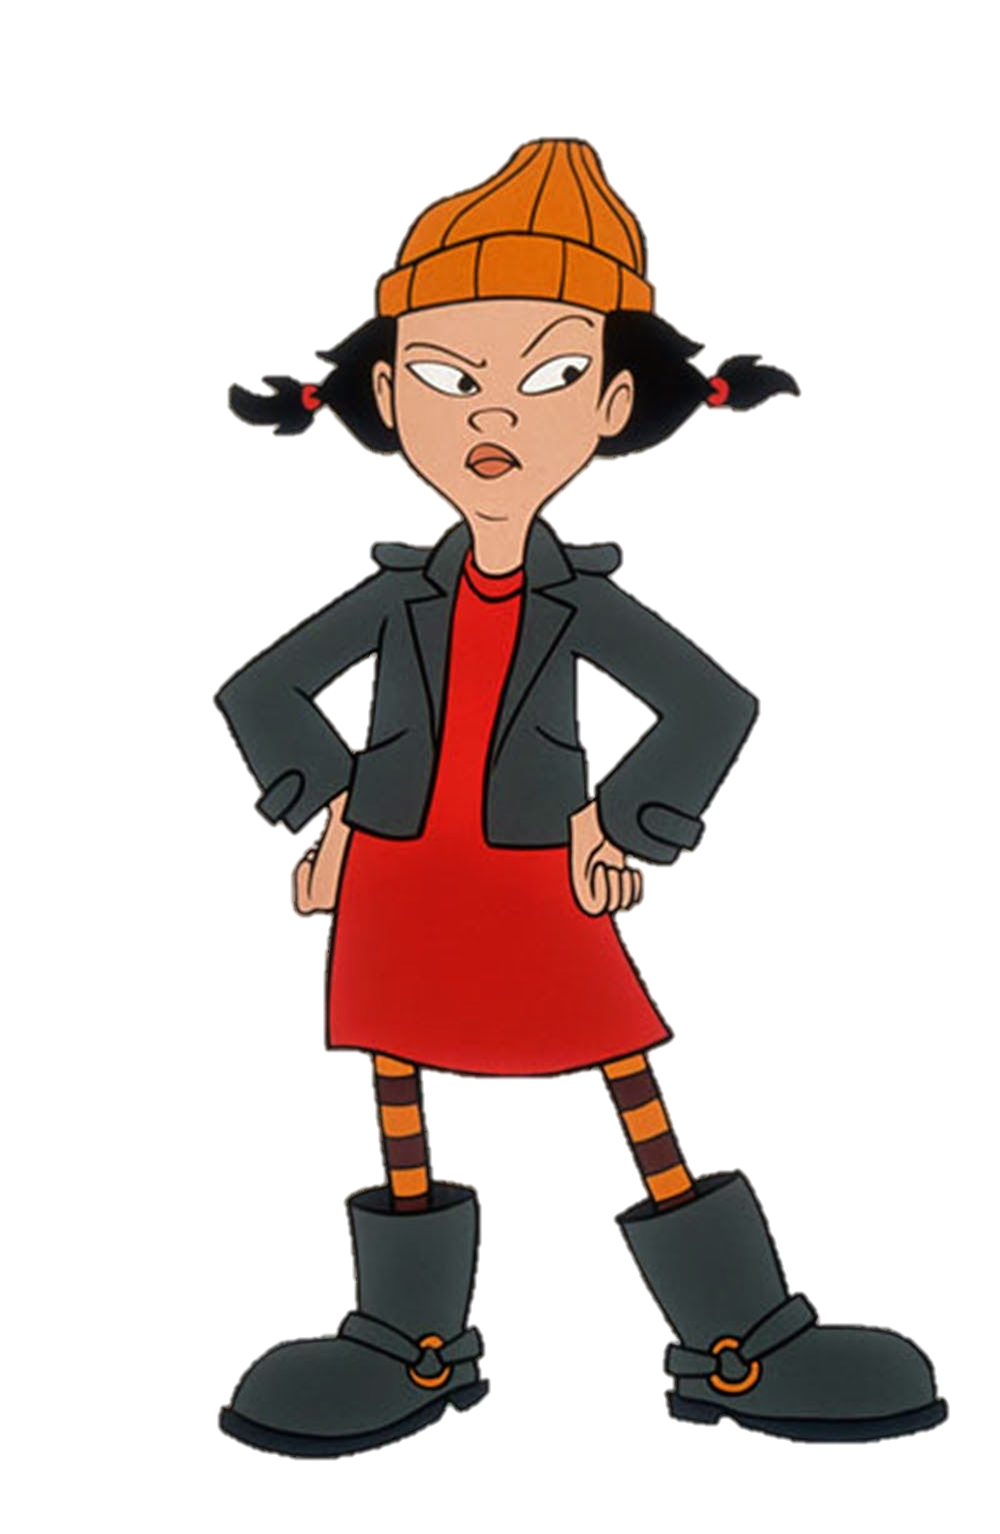 Image spinelli png wiki. Clipart toys recess